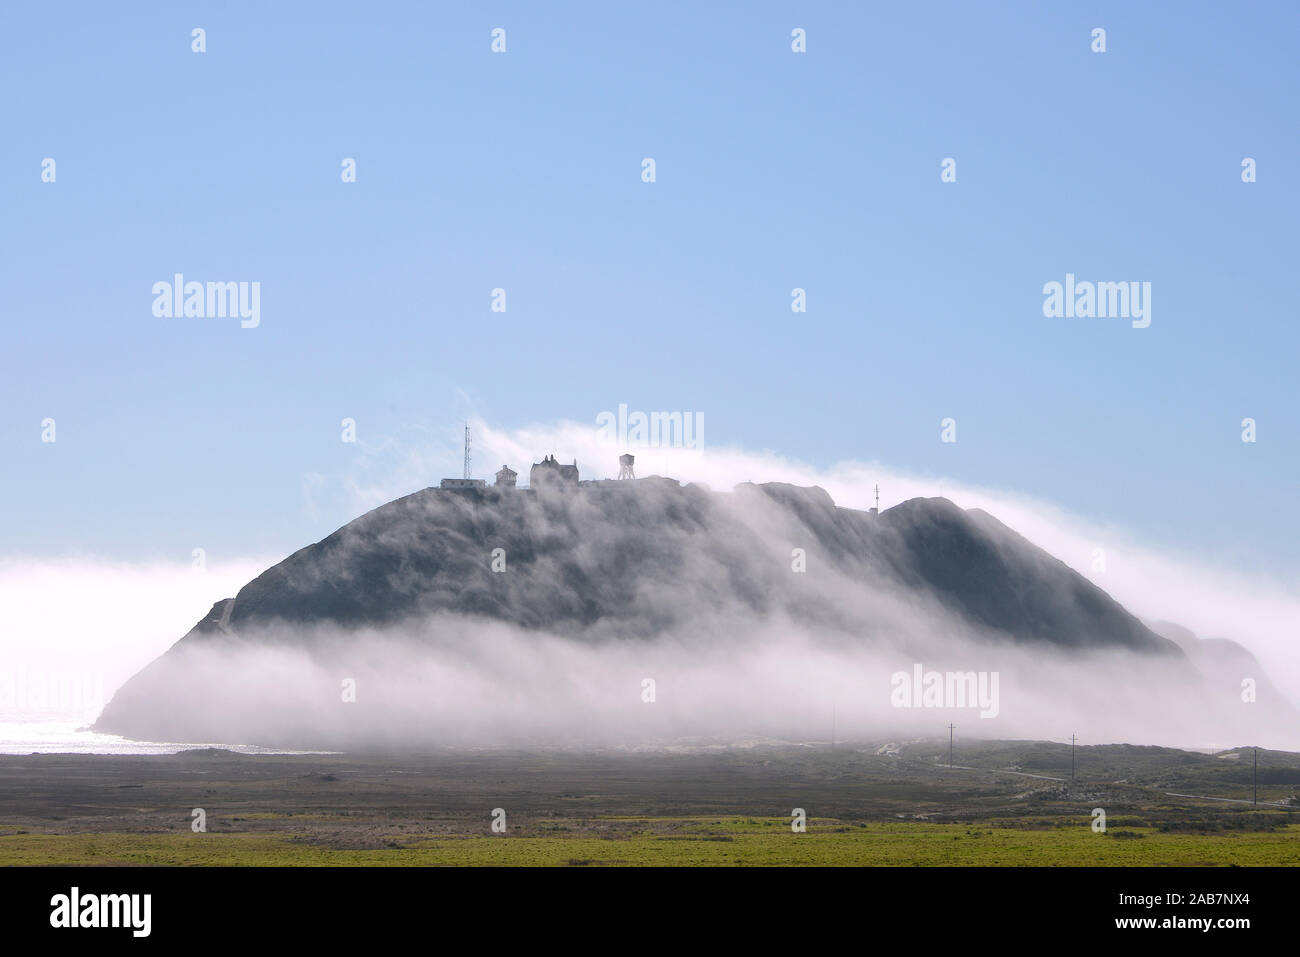 Fog over Point Sur, Peninsula on California State Route 1, Highway 1, coastal road along the Pacific Ocean, California, USA Stock Photo